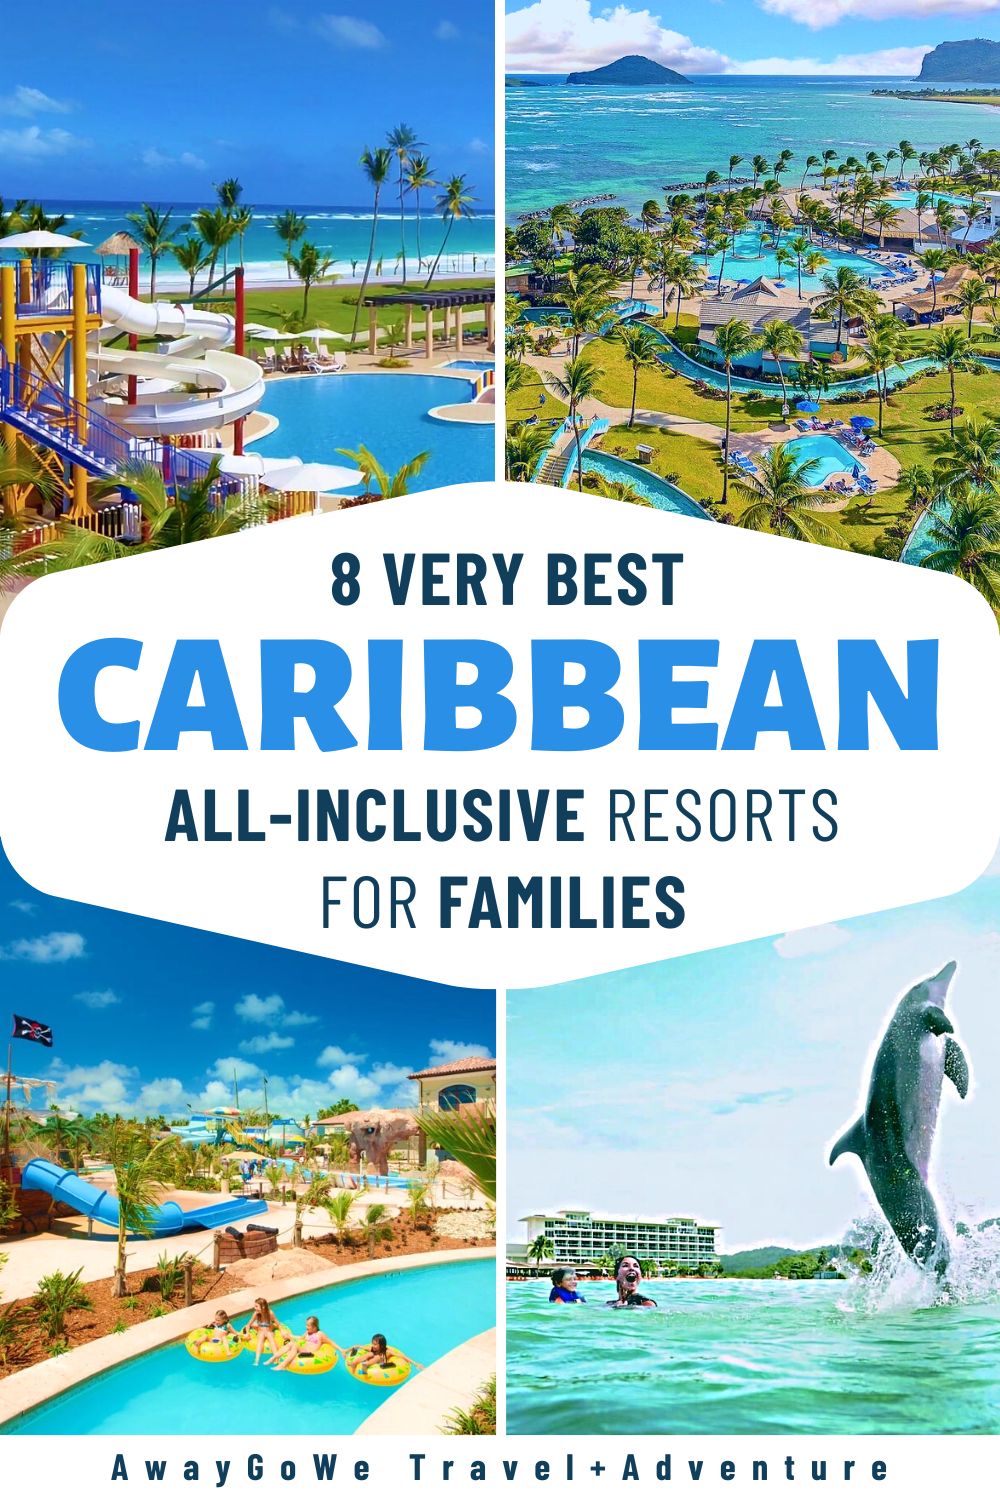 Caribbean all-inclusive family resorts